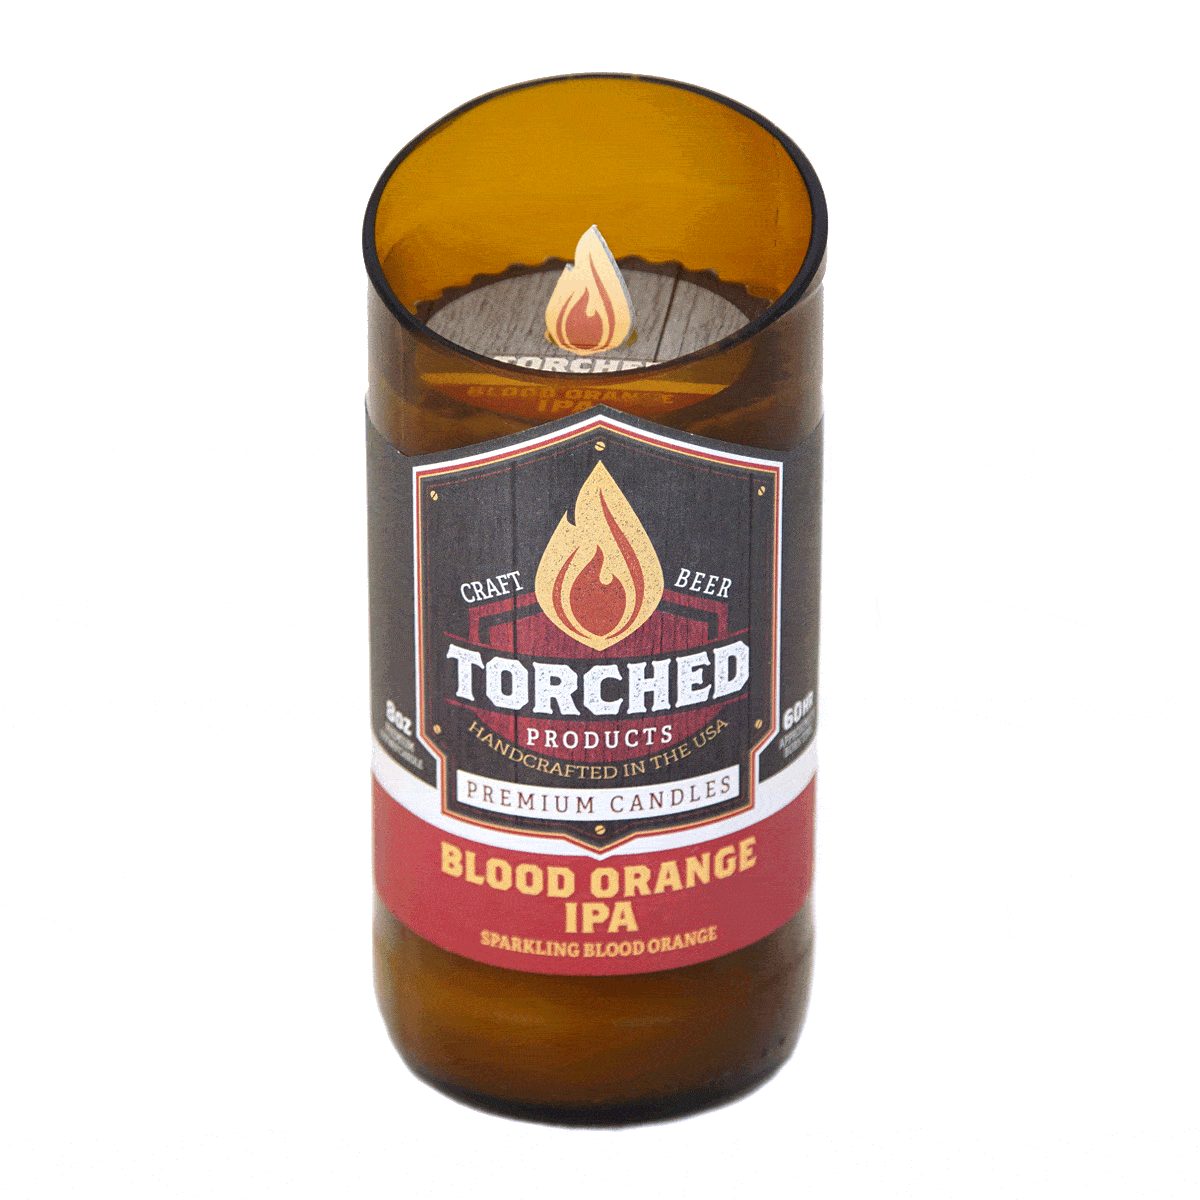 Torched Products Beer Candles Blood Orange IPA Beer Candle